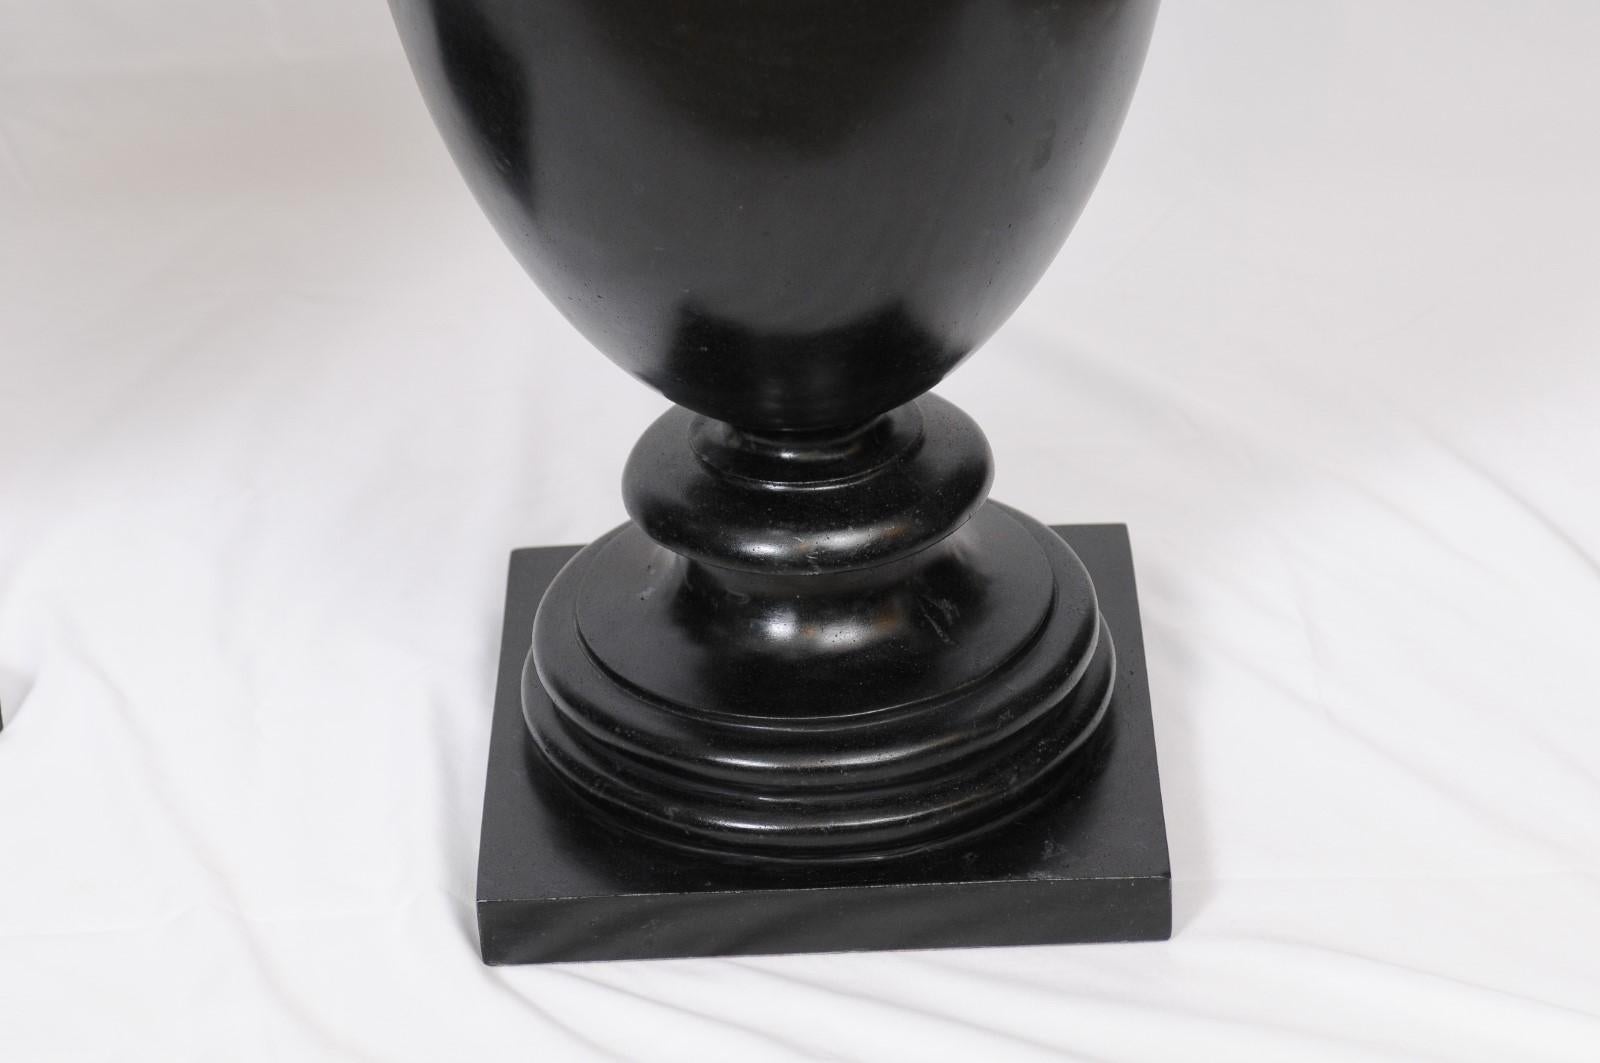 Classical Urn with Cormorant Handles Cast in Black Wax Stone 1